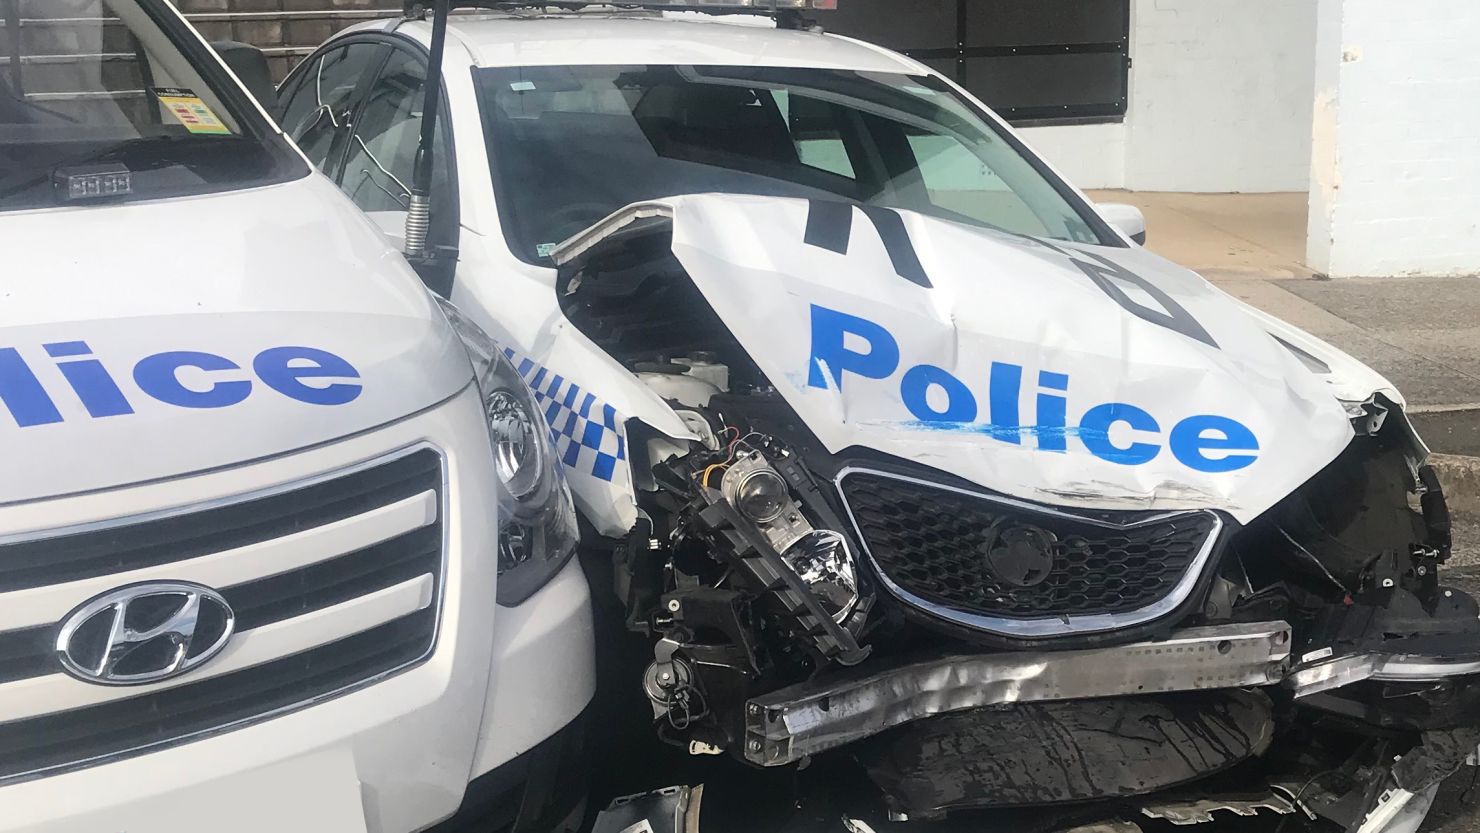 A police car damaged after it was hit by a van carrying meth in Sydney, Australia, on July 23, 2019.